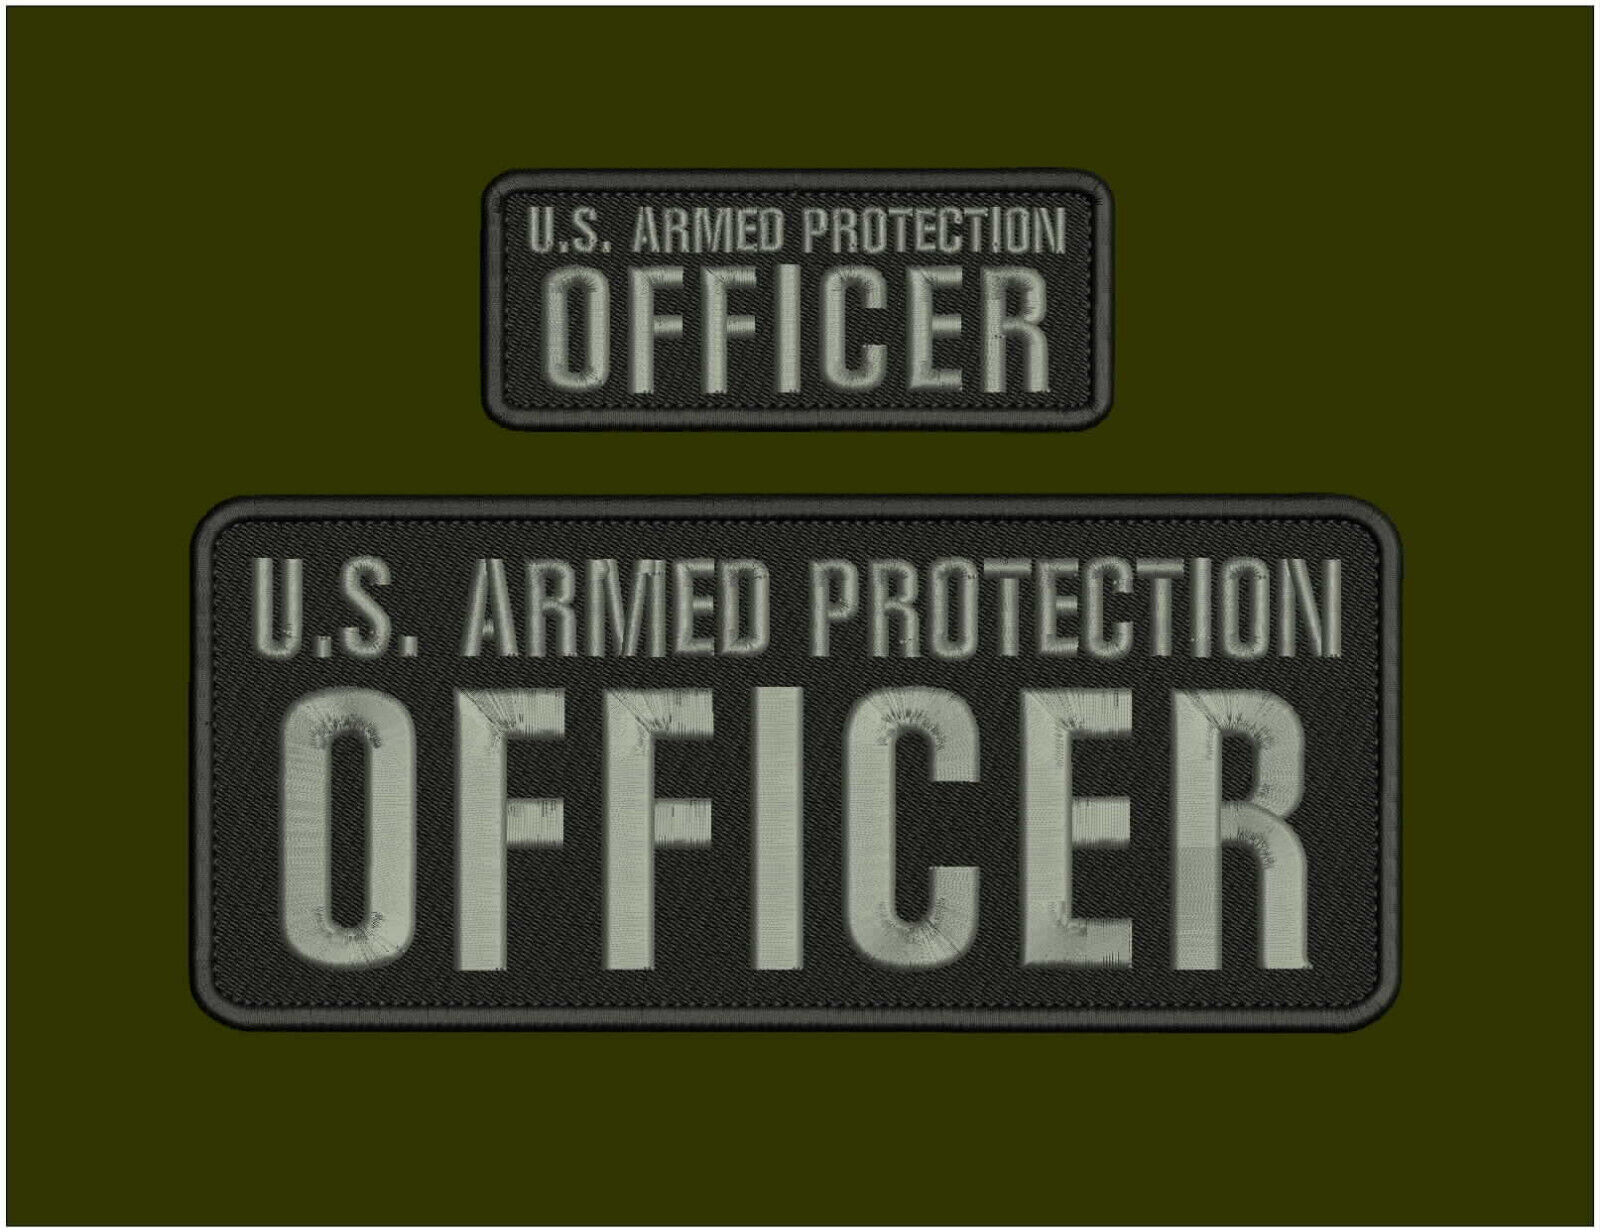 U.S. ARMED PROTECTION OFFICER EMB PATCH 4X10 AND 2X5 HOOK ON BACK GRAY ON BLACK